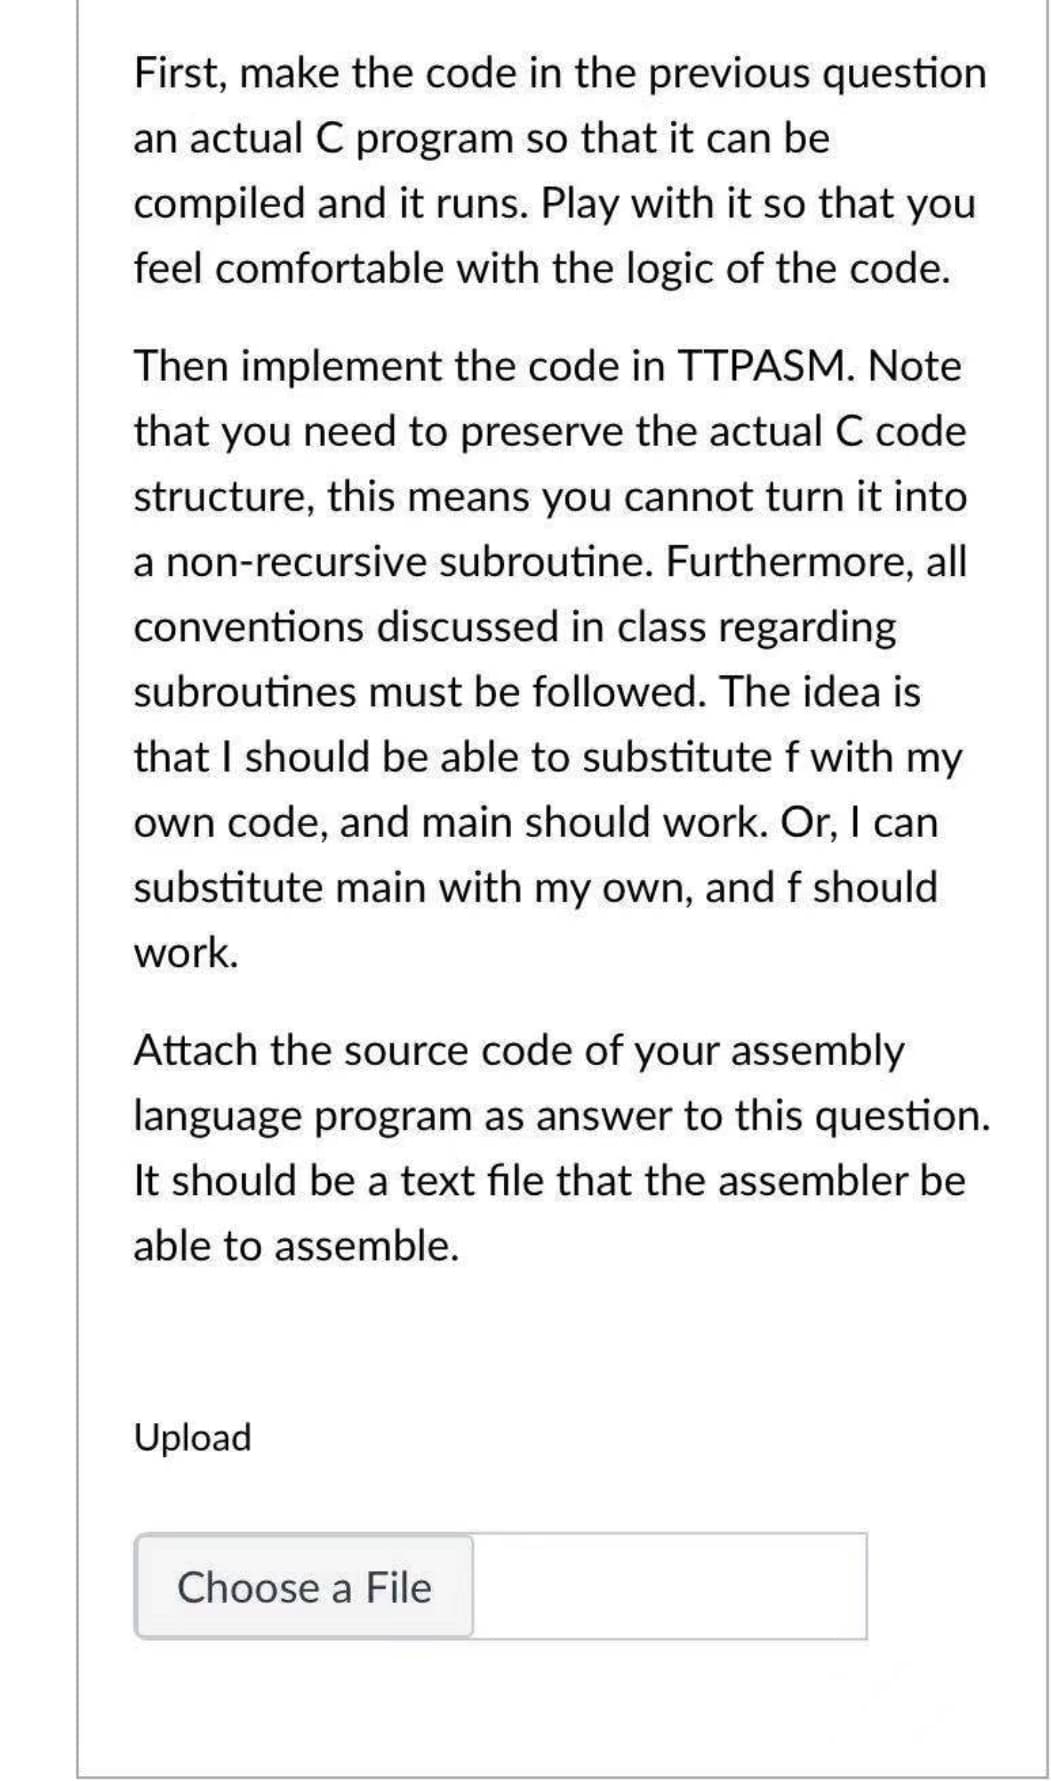 First, make the code in the previous question
an actual C program so that it can be
compiled and it runs. Play with it so that you
feel comfortable with the logic of the code.
Then implement the code in TTPASM. Note
that you need to preserve the actual C code
structure, this means you cannot turn it into
a non-recursive subroutine. Furthermore, all
conventions discussed in class regarding
subroutines must be followed. The idea is
that I should be able to substitute f with my
own code, and main should work. Or, I can
substitute main with my own, and f should
work.
Attach the source code of your assembly
language program as answer to this question.
It should be a text file that the assembler be
able to assemble.
Upload
Choose a File
